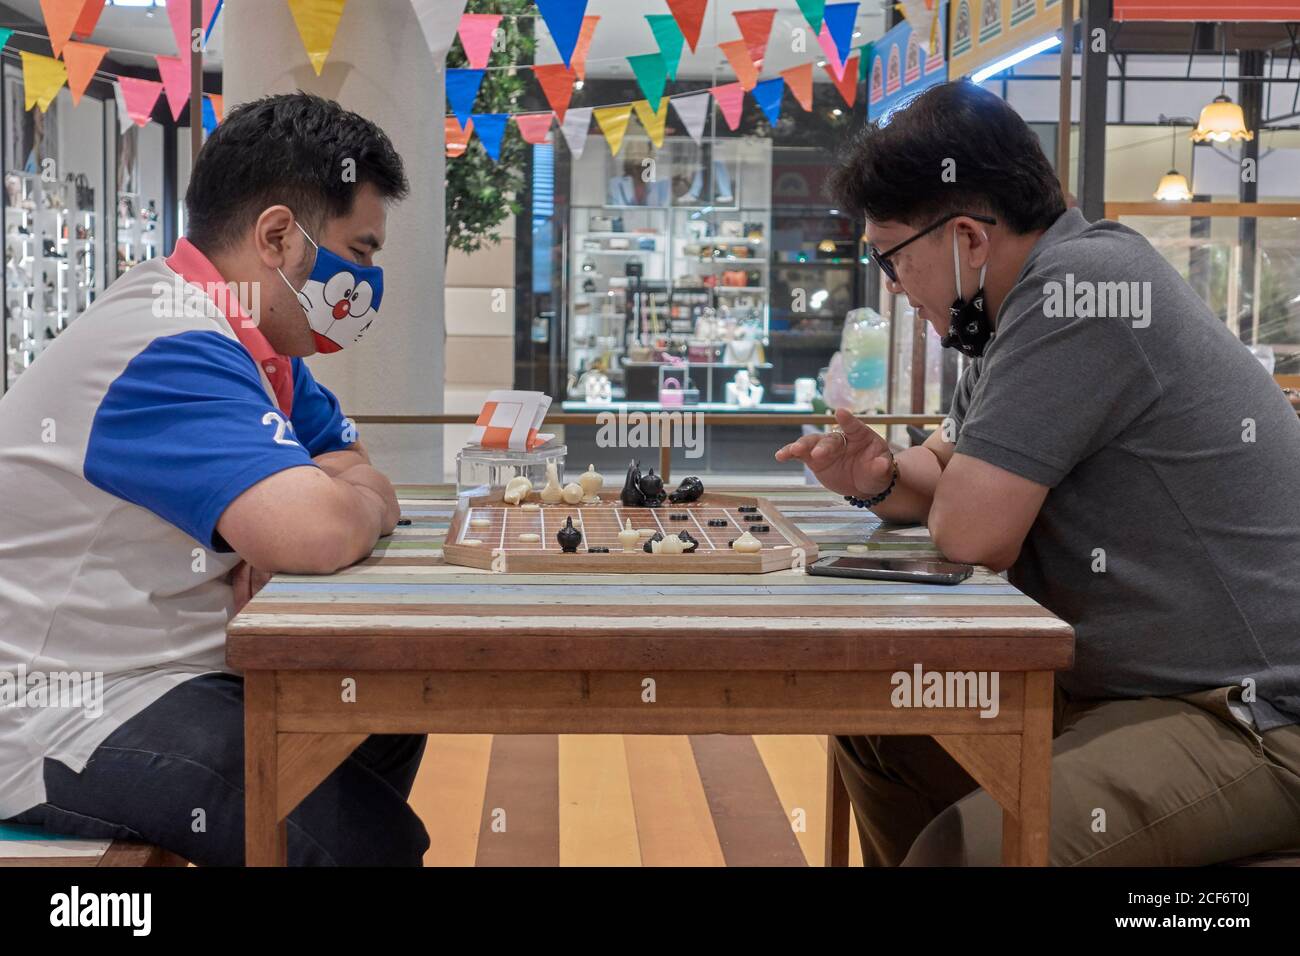 Thailand chess. Men playing Makruk, which is a Thailand version of chess. Southeast Asia Stock Photo